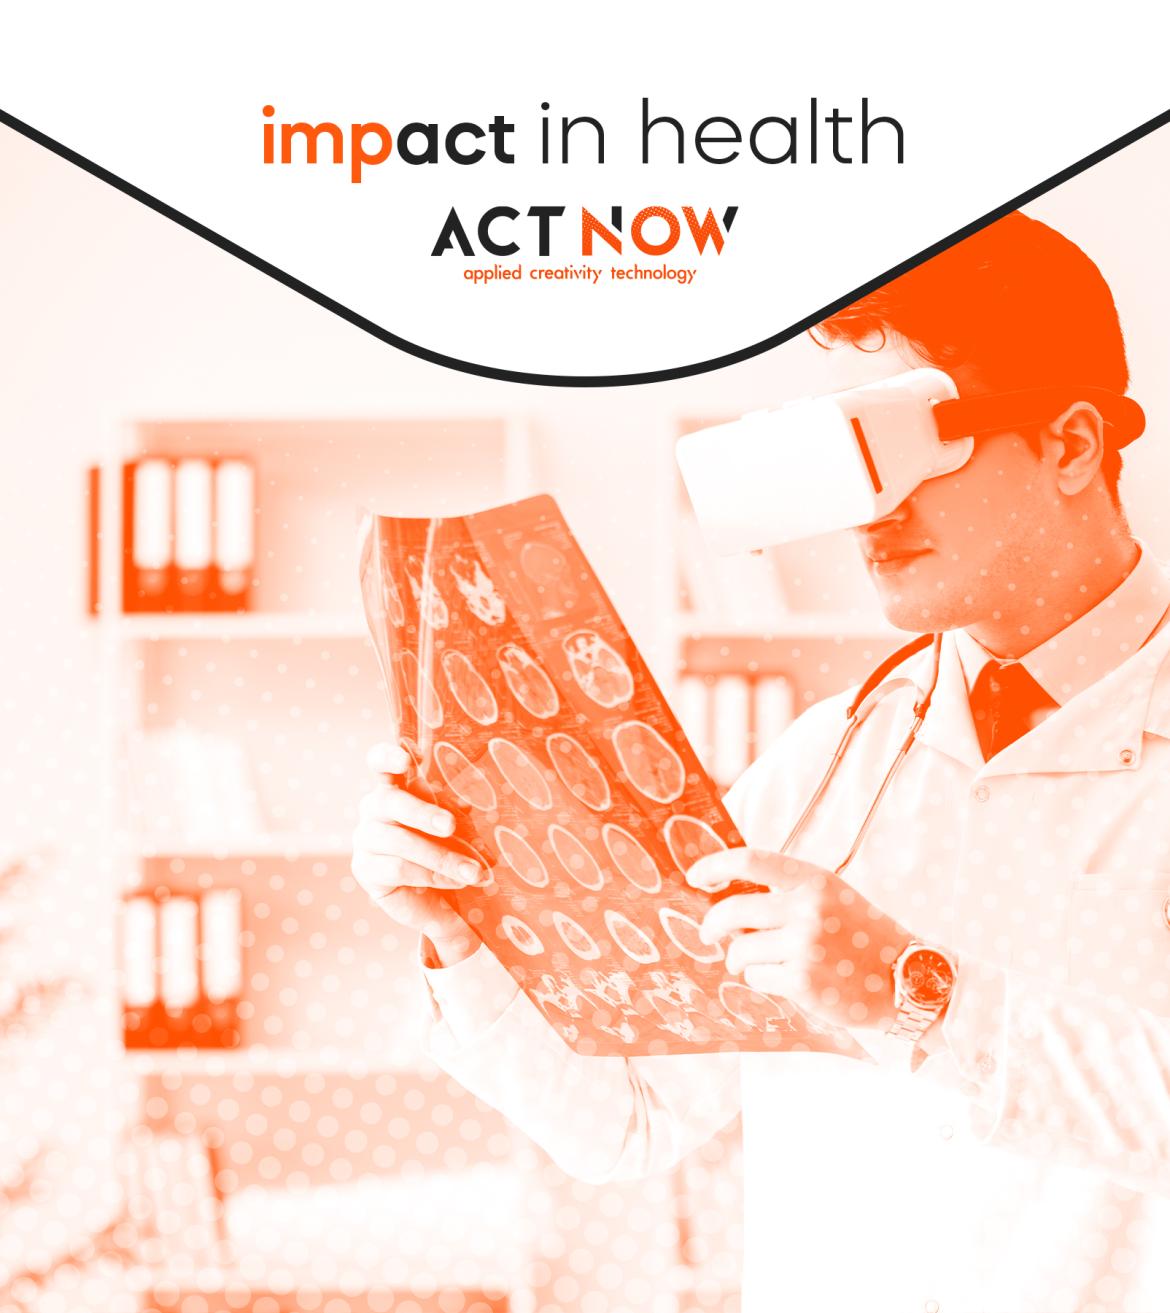 Impact in health